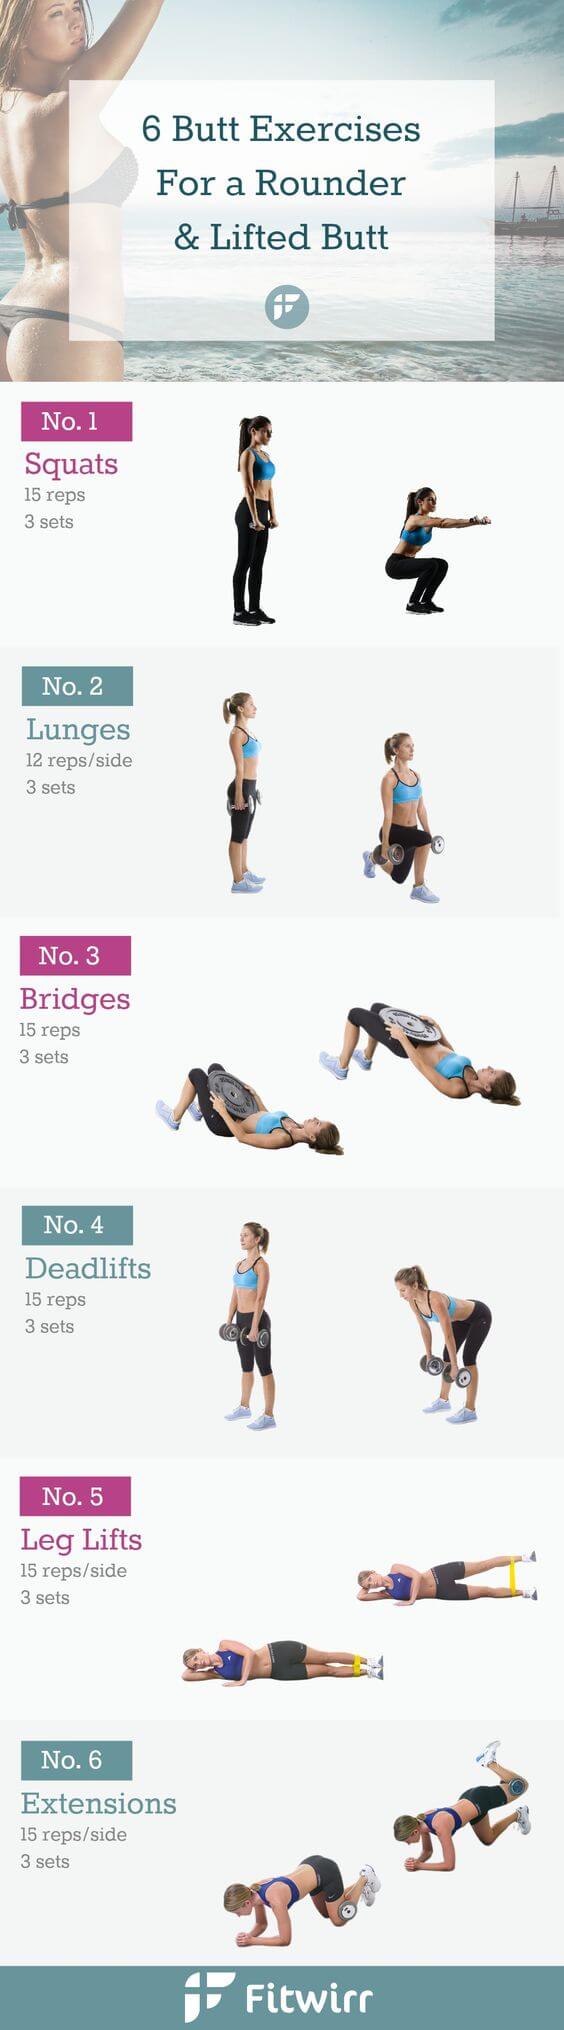 Exercises To Tone The Butt 97